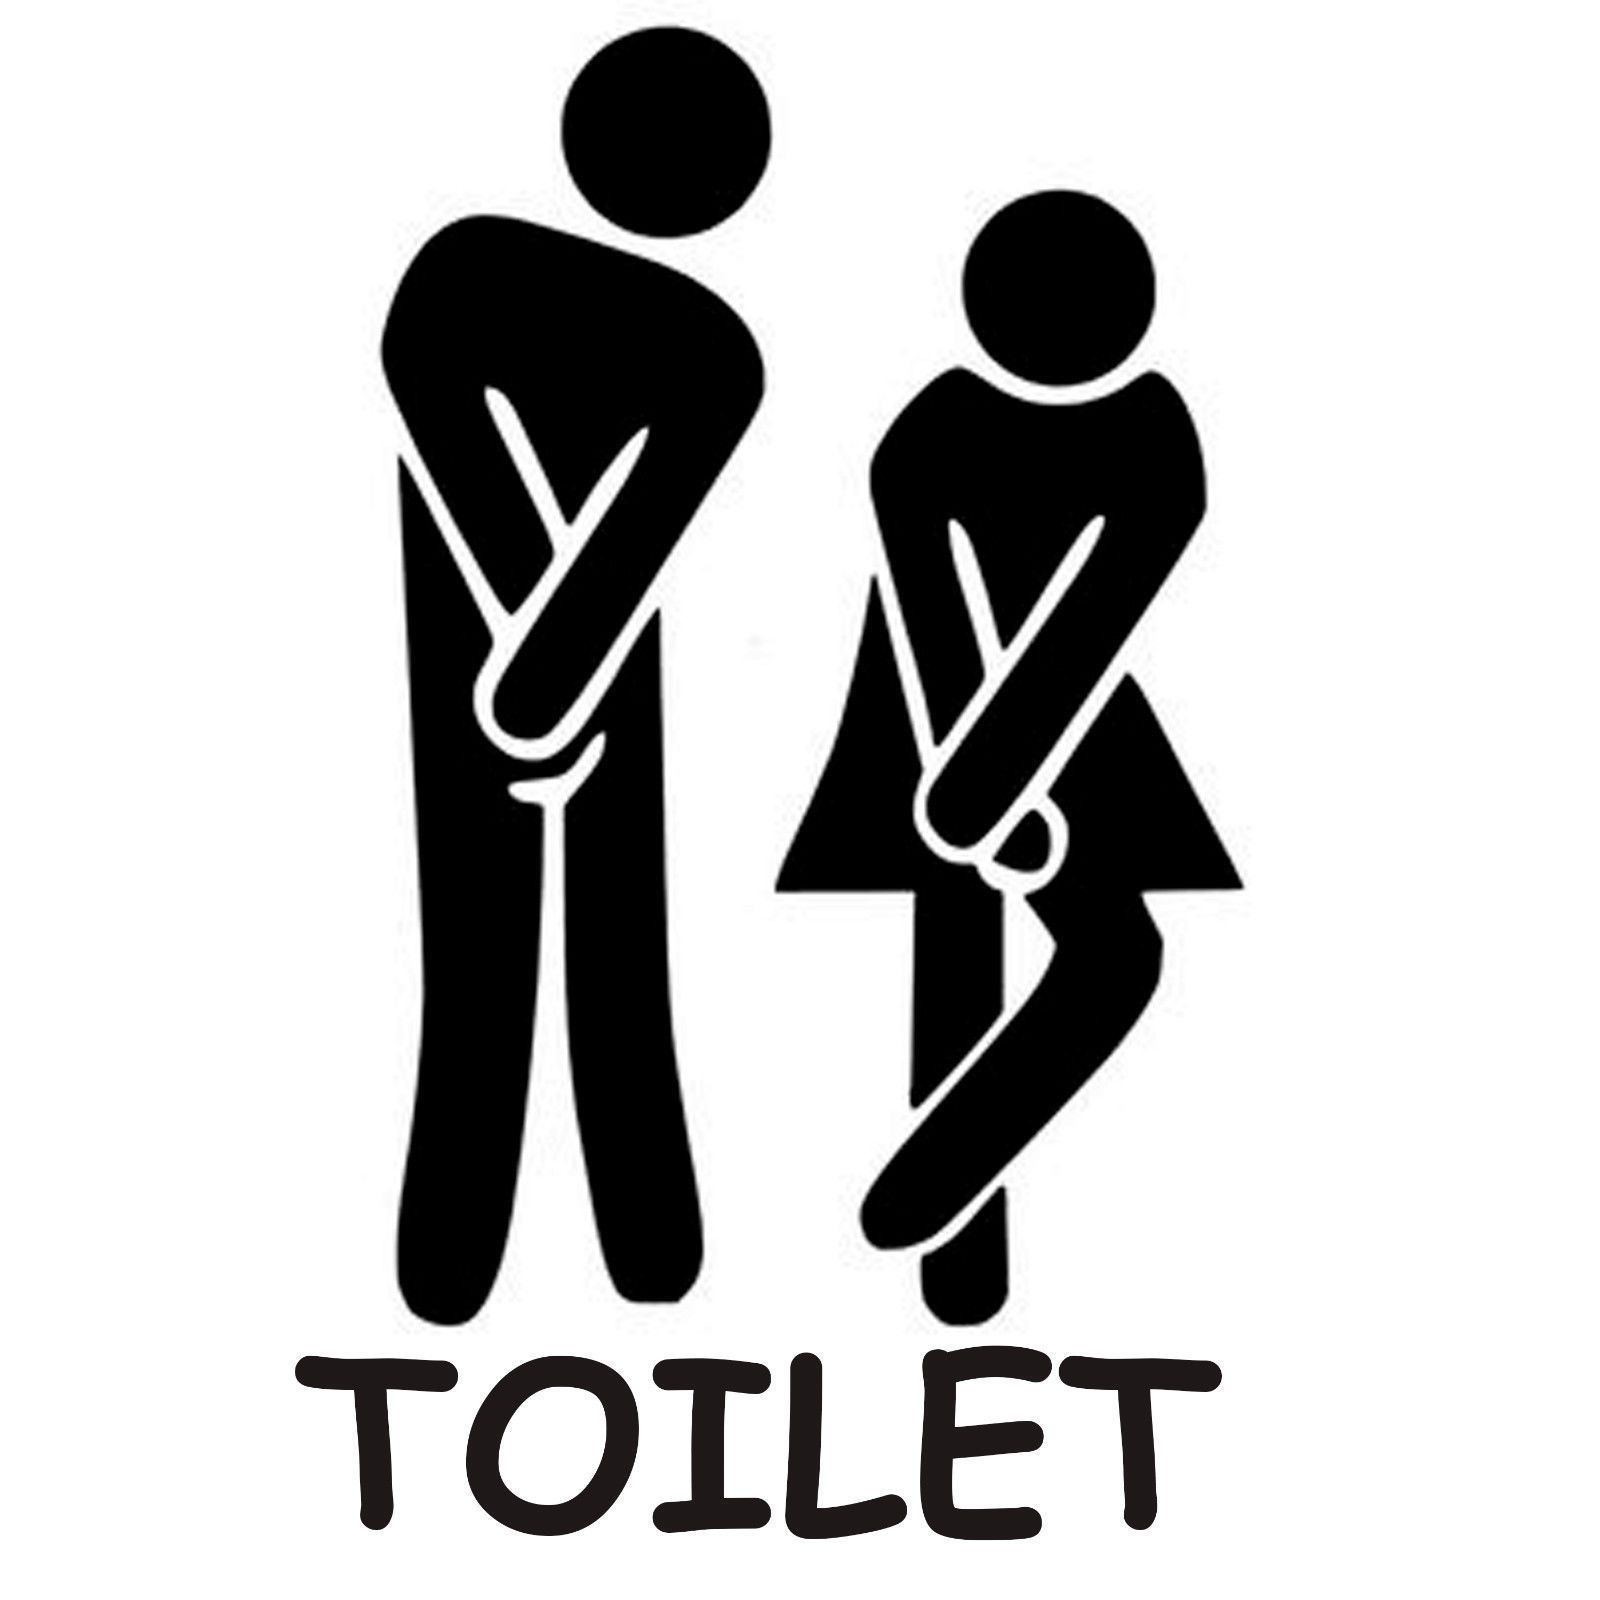 Toilet Seat Wall Sticker Decals Vinyl Removable Funny Bathroom-Decor UK SELLER